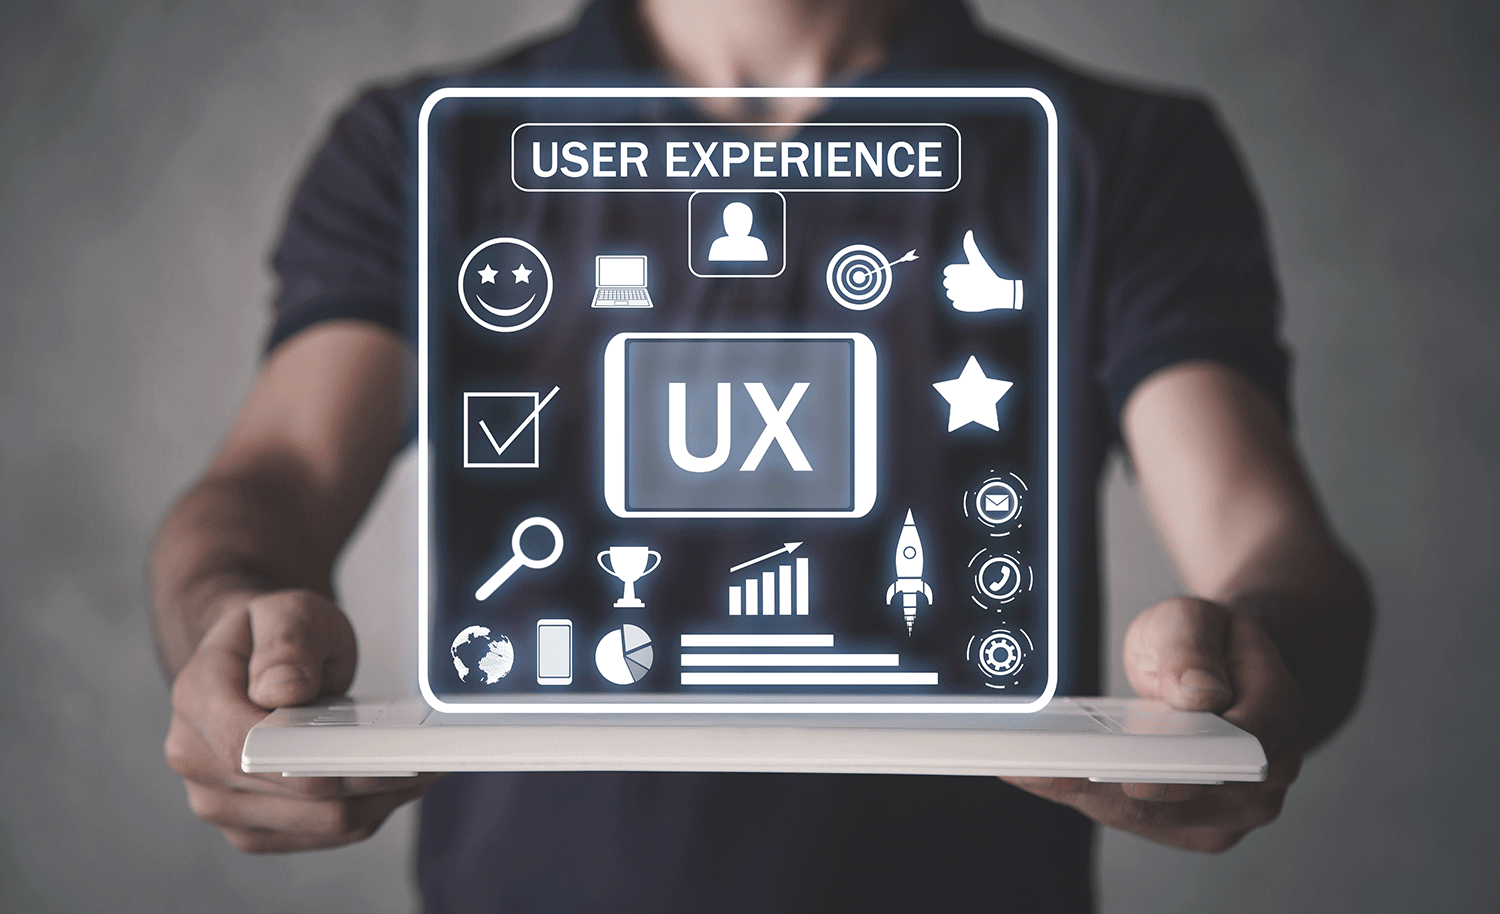 Tips for Optimizing User Experience with Web Apps